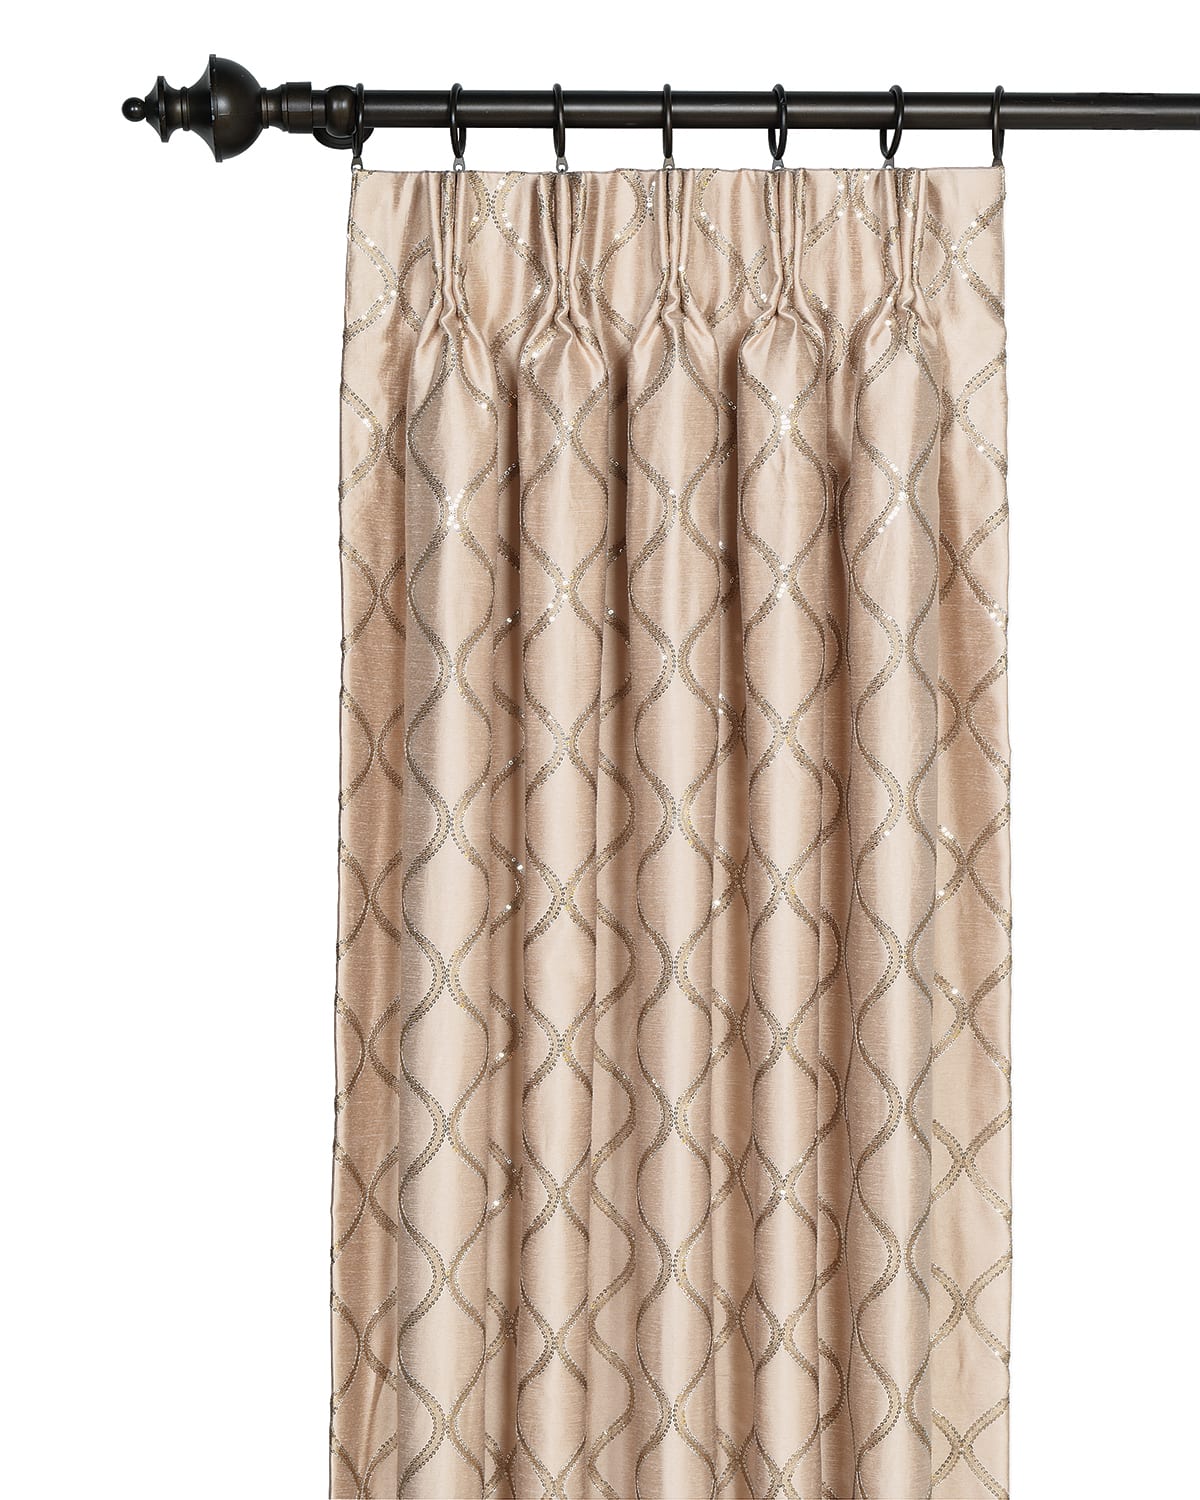 Image Eastern Accents Bardot Curtain Panel, 96"